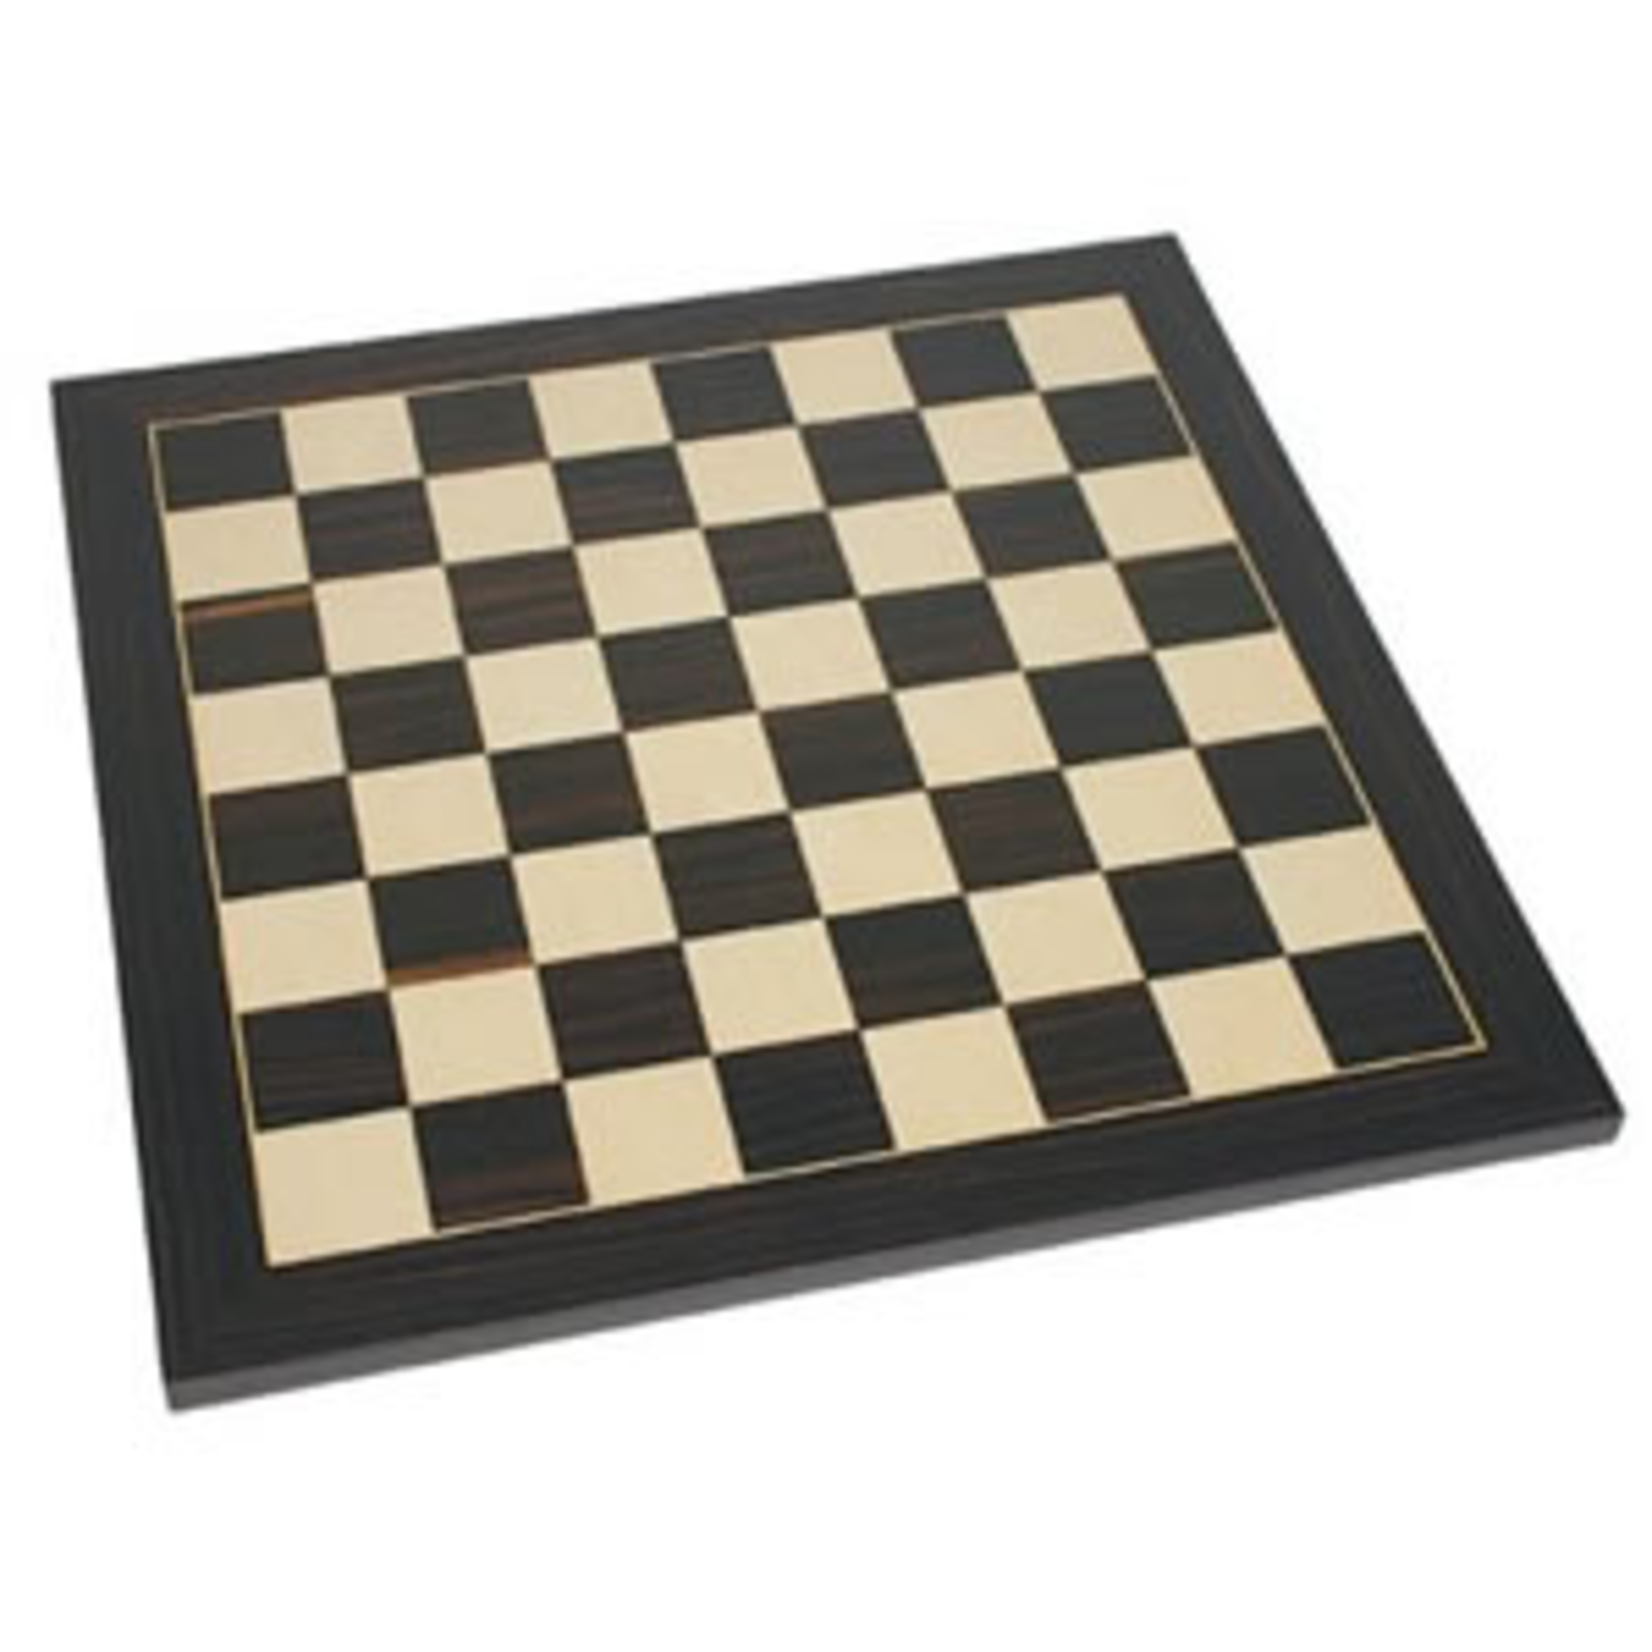 Wood Expressions 15-Inch Chess Board (Zebra & Natural Wood)